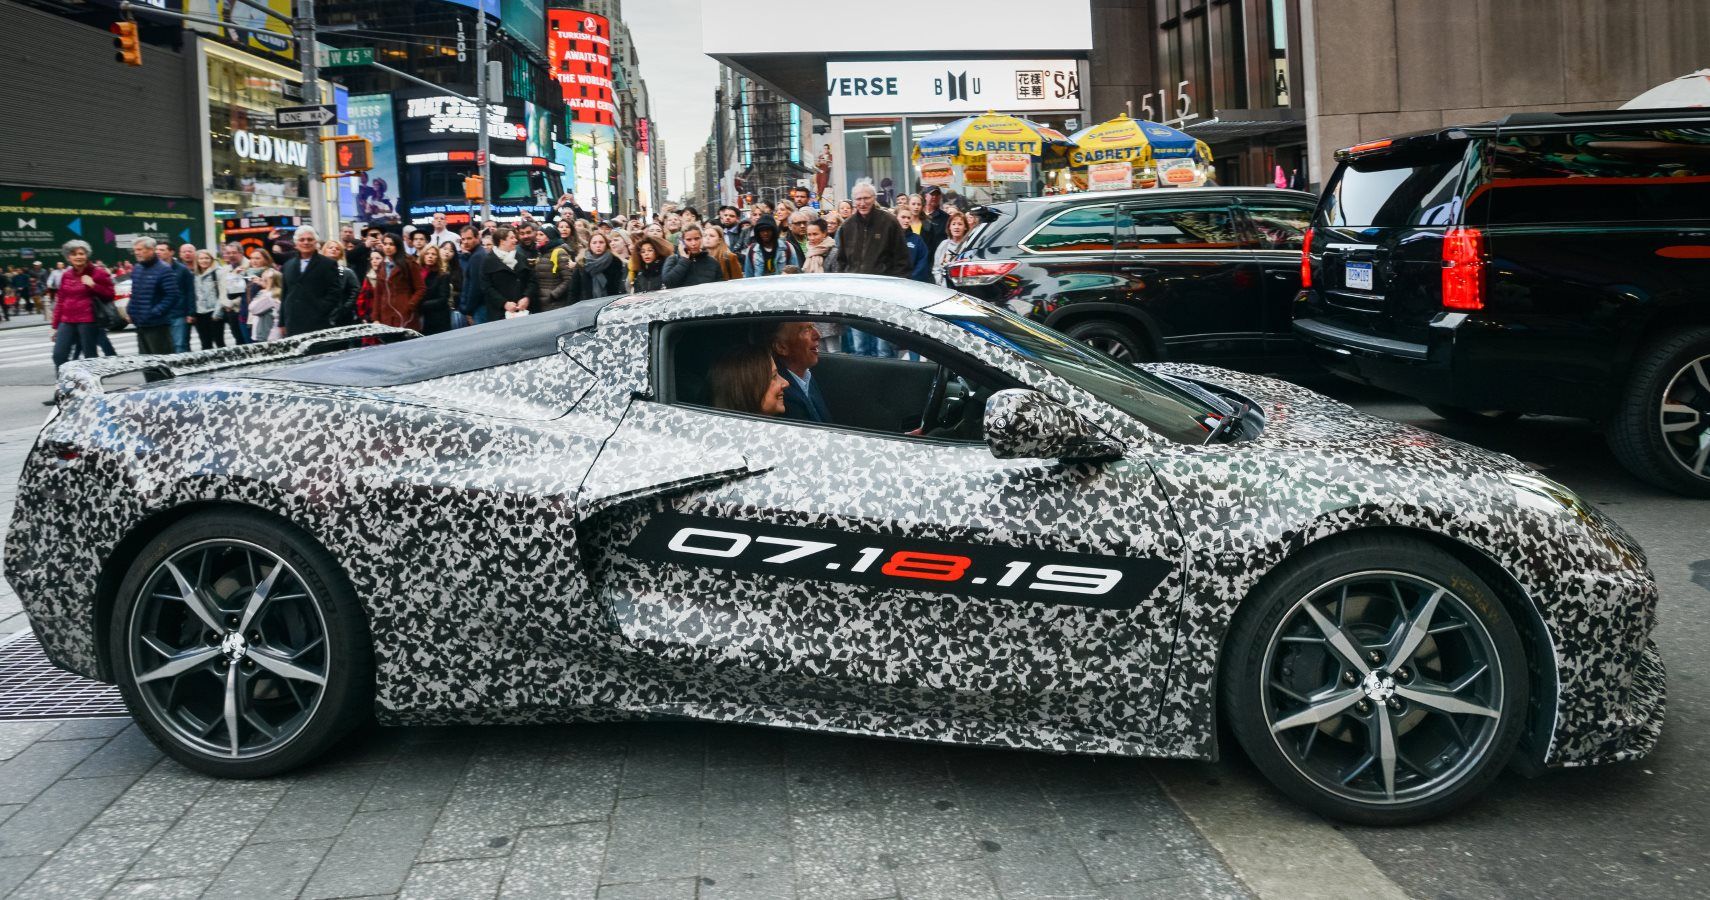 Chevrolet Corvette Chief Engineer Tadge Juechter and General Motors Chairman and CEO Mary Barra drive in a camouflaged next generation Corvette down 7th Avenue near Times Square Thursday, April 11, 2019 in New York, New York. The next generation Corvette will be unveiled on July 18. (Photo by Jennifer Altman for Chevrolet)